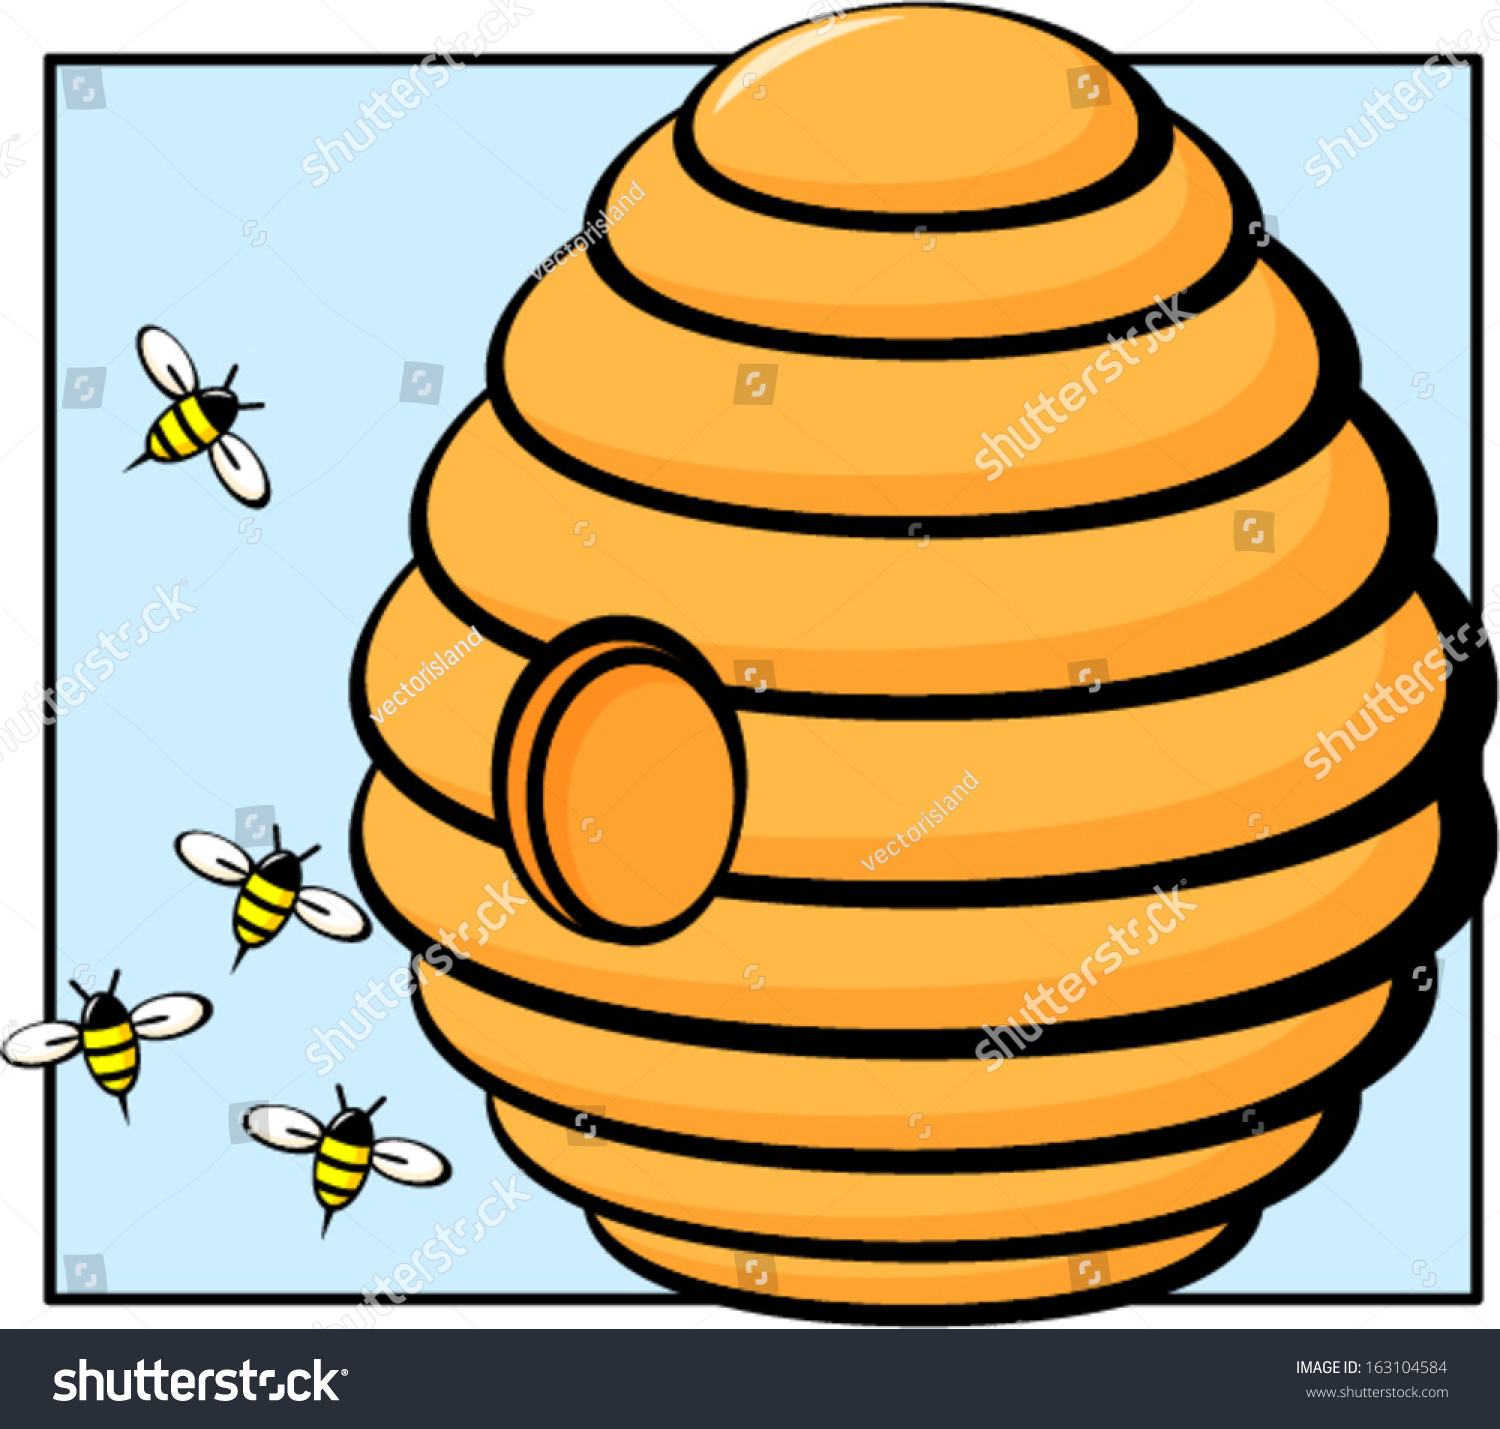 clip art of a bee hive - photo #44